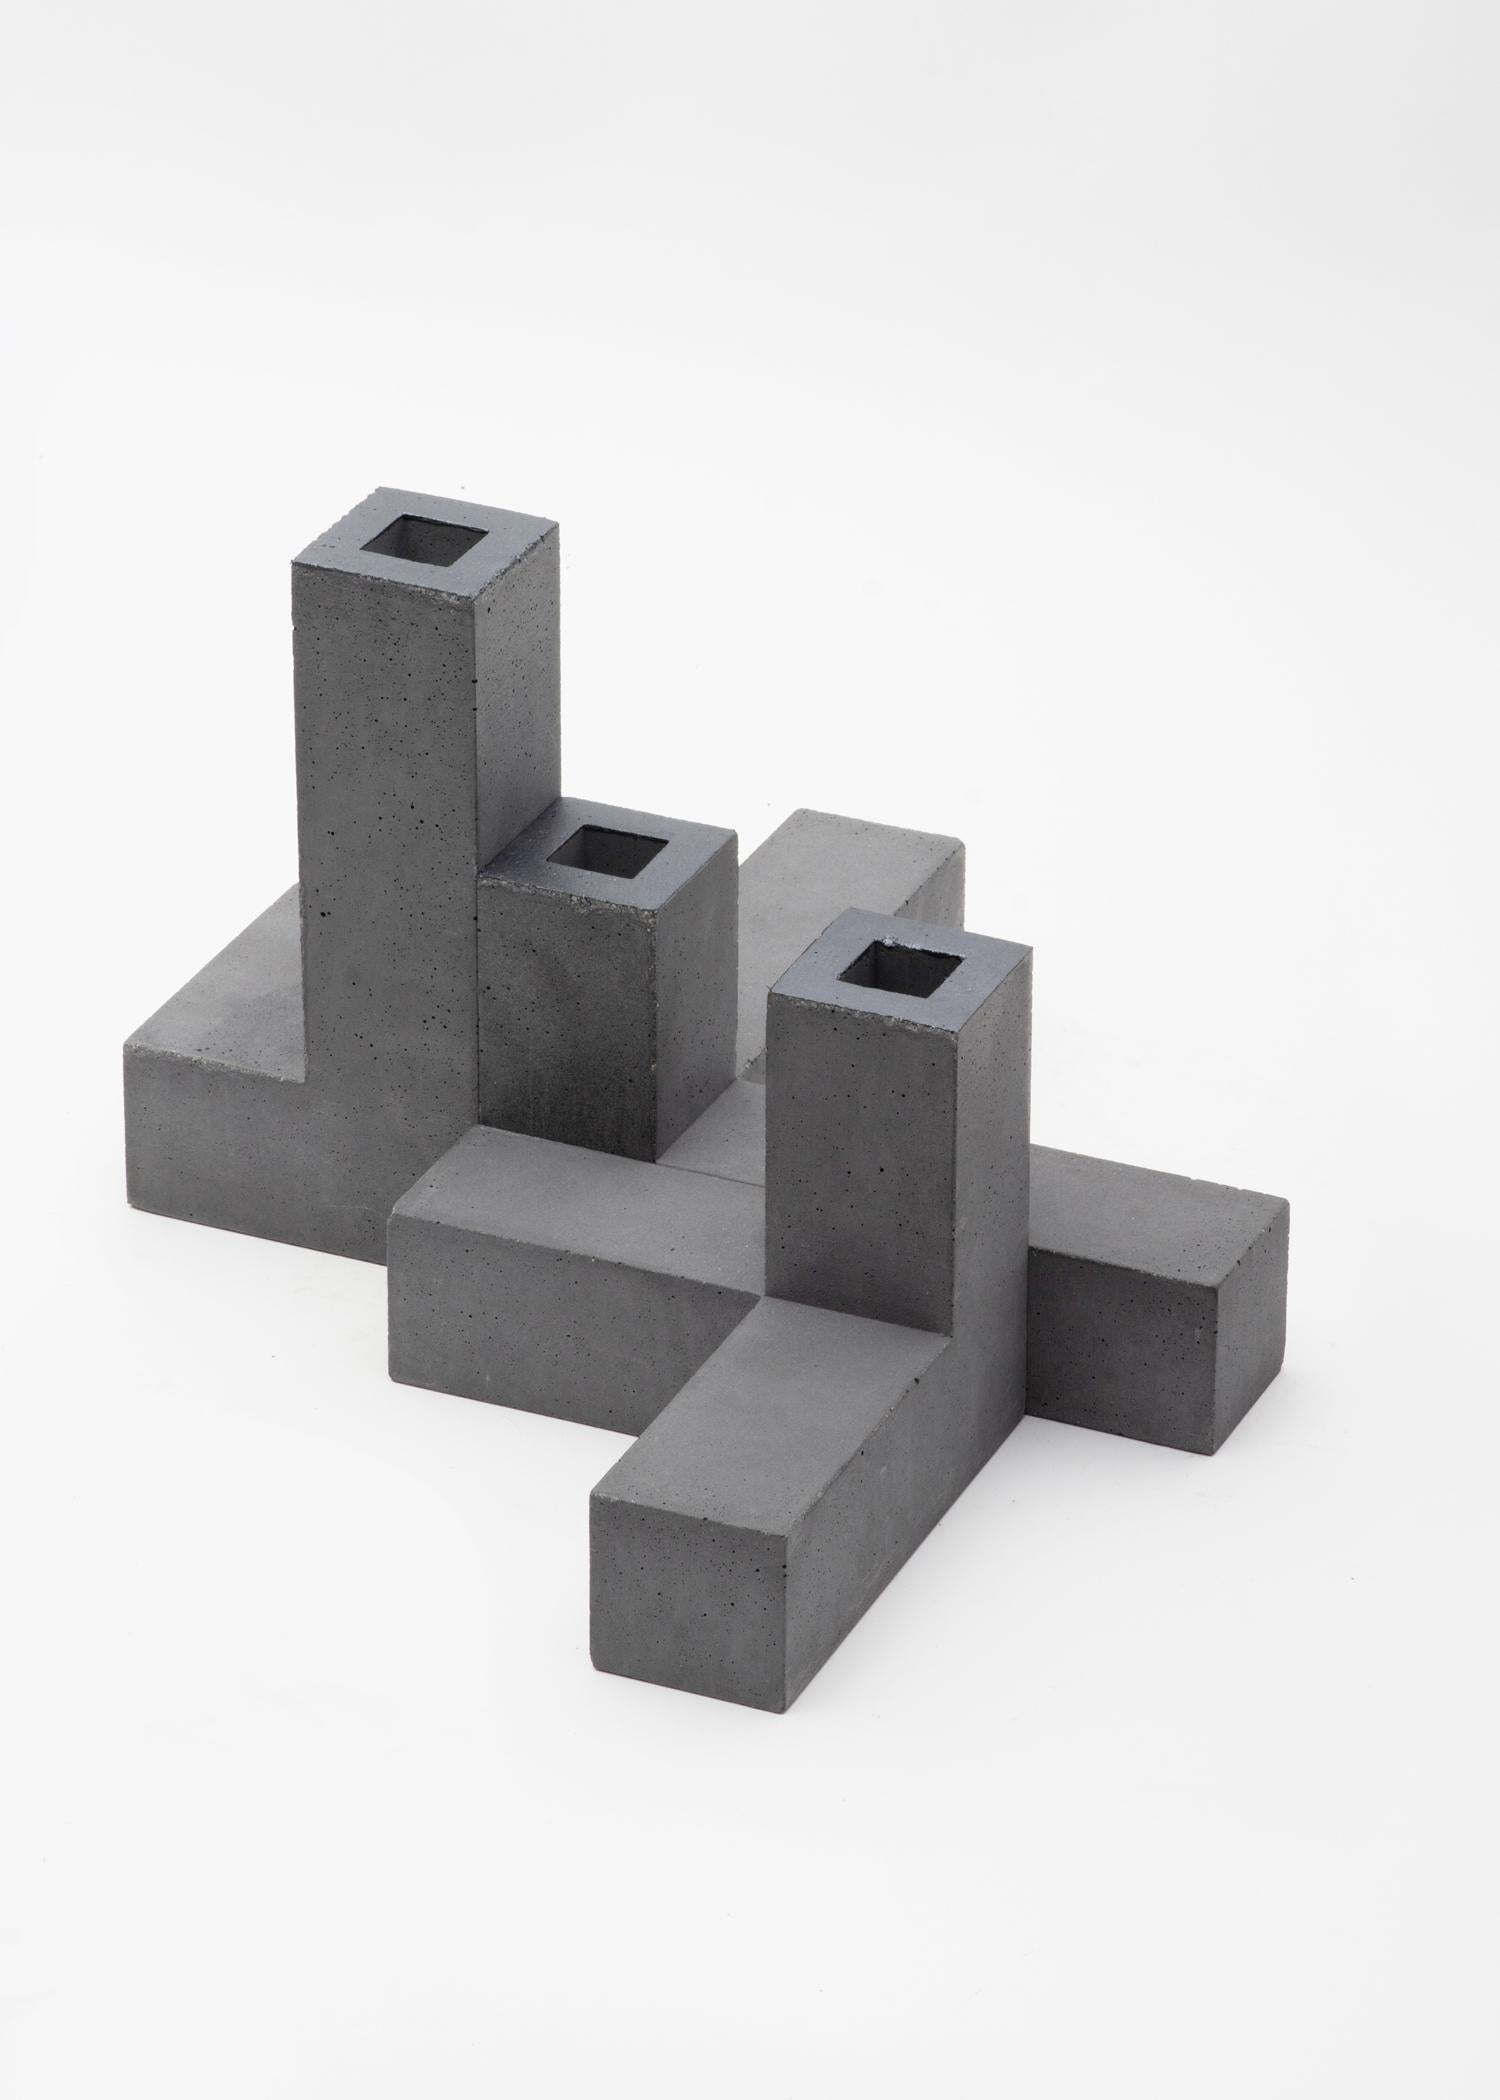 Tre Torri - Natural Concrete

Tre Torri is a small minimal architecture composed of three concrete elements: three towers of different height, composed as a group forming a square base.

The elements can move assuming different positions, always